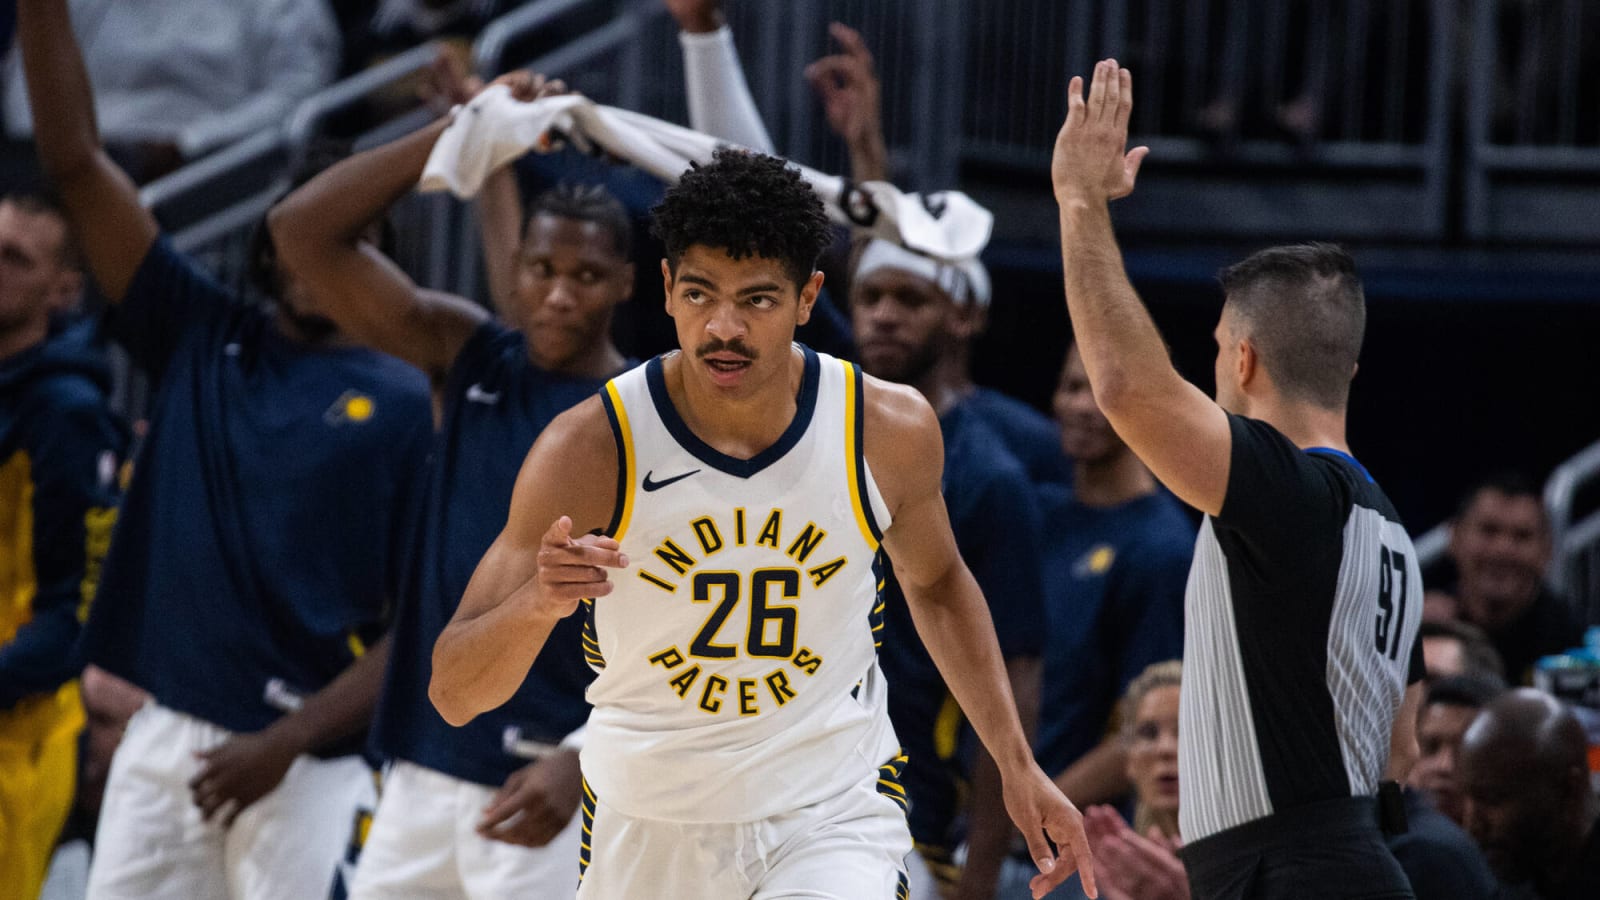 Ben Sheppard scores first NBA points in front of family in Boston, off to a solid start for Indiana Pacers